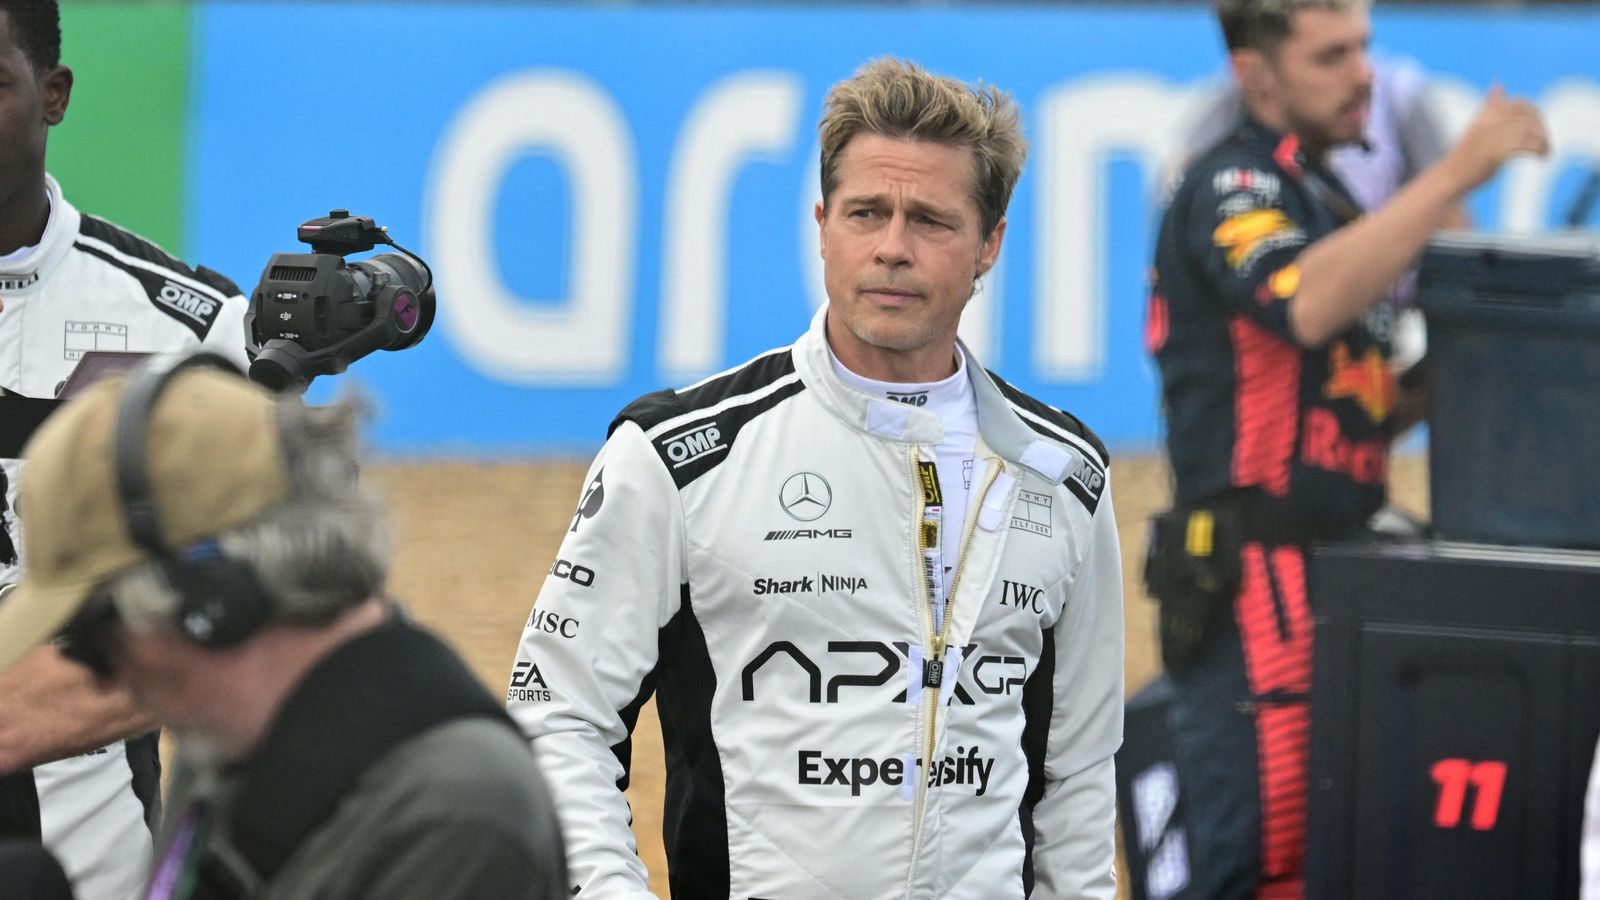 Brad Pitt pauses filming on F1 blockbuster in support of Hollywood strikes